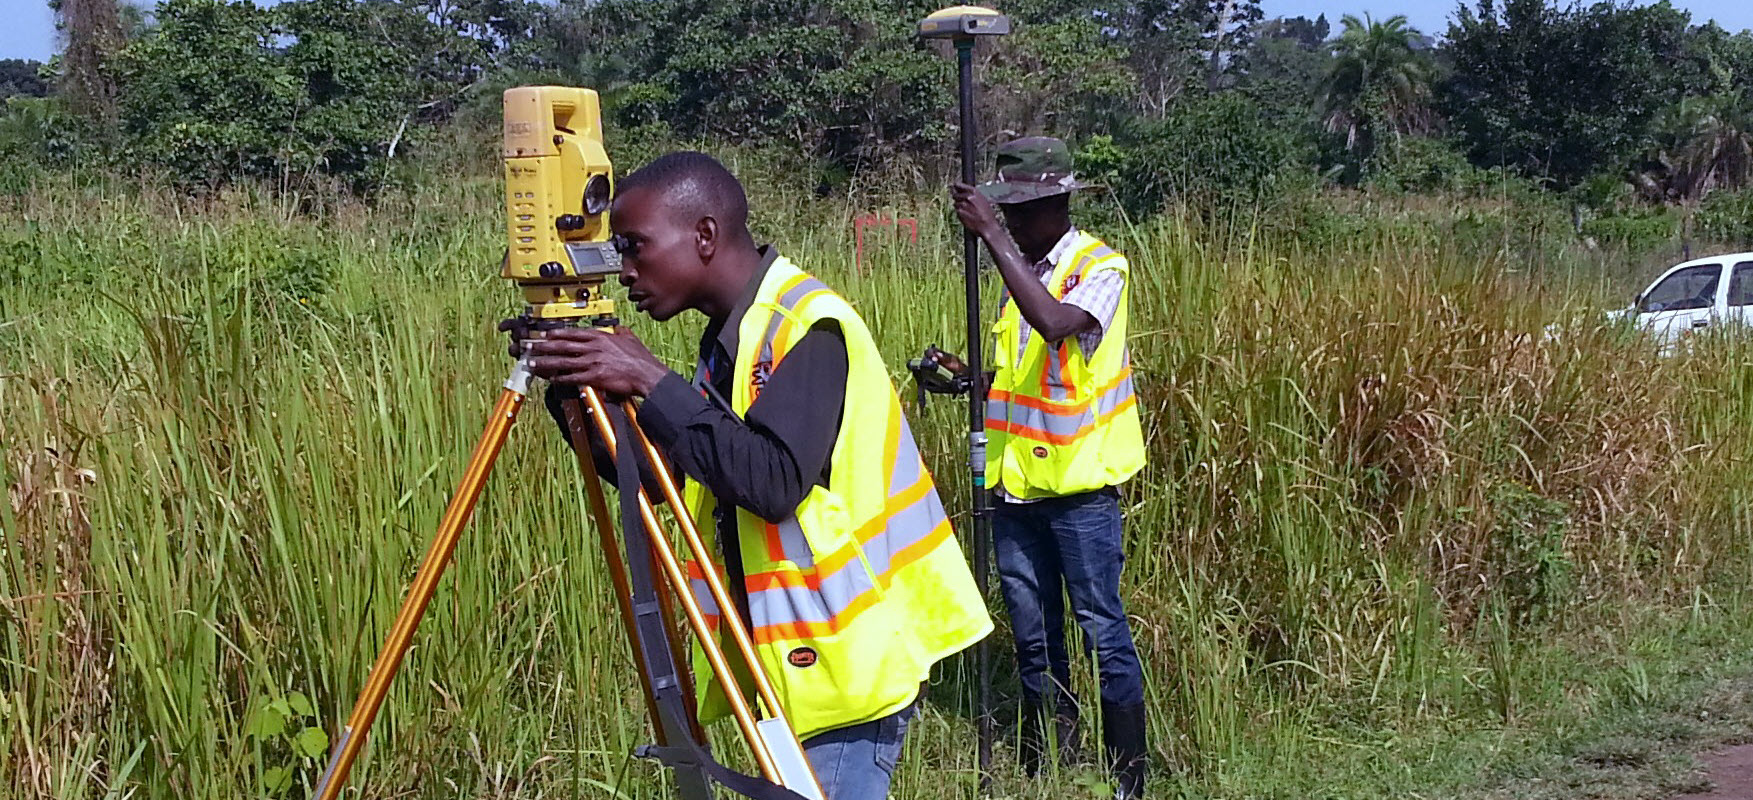 Always use qualified and registered surveyors.